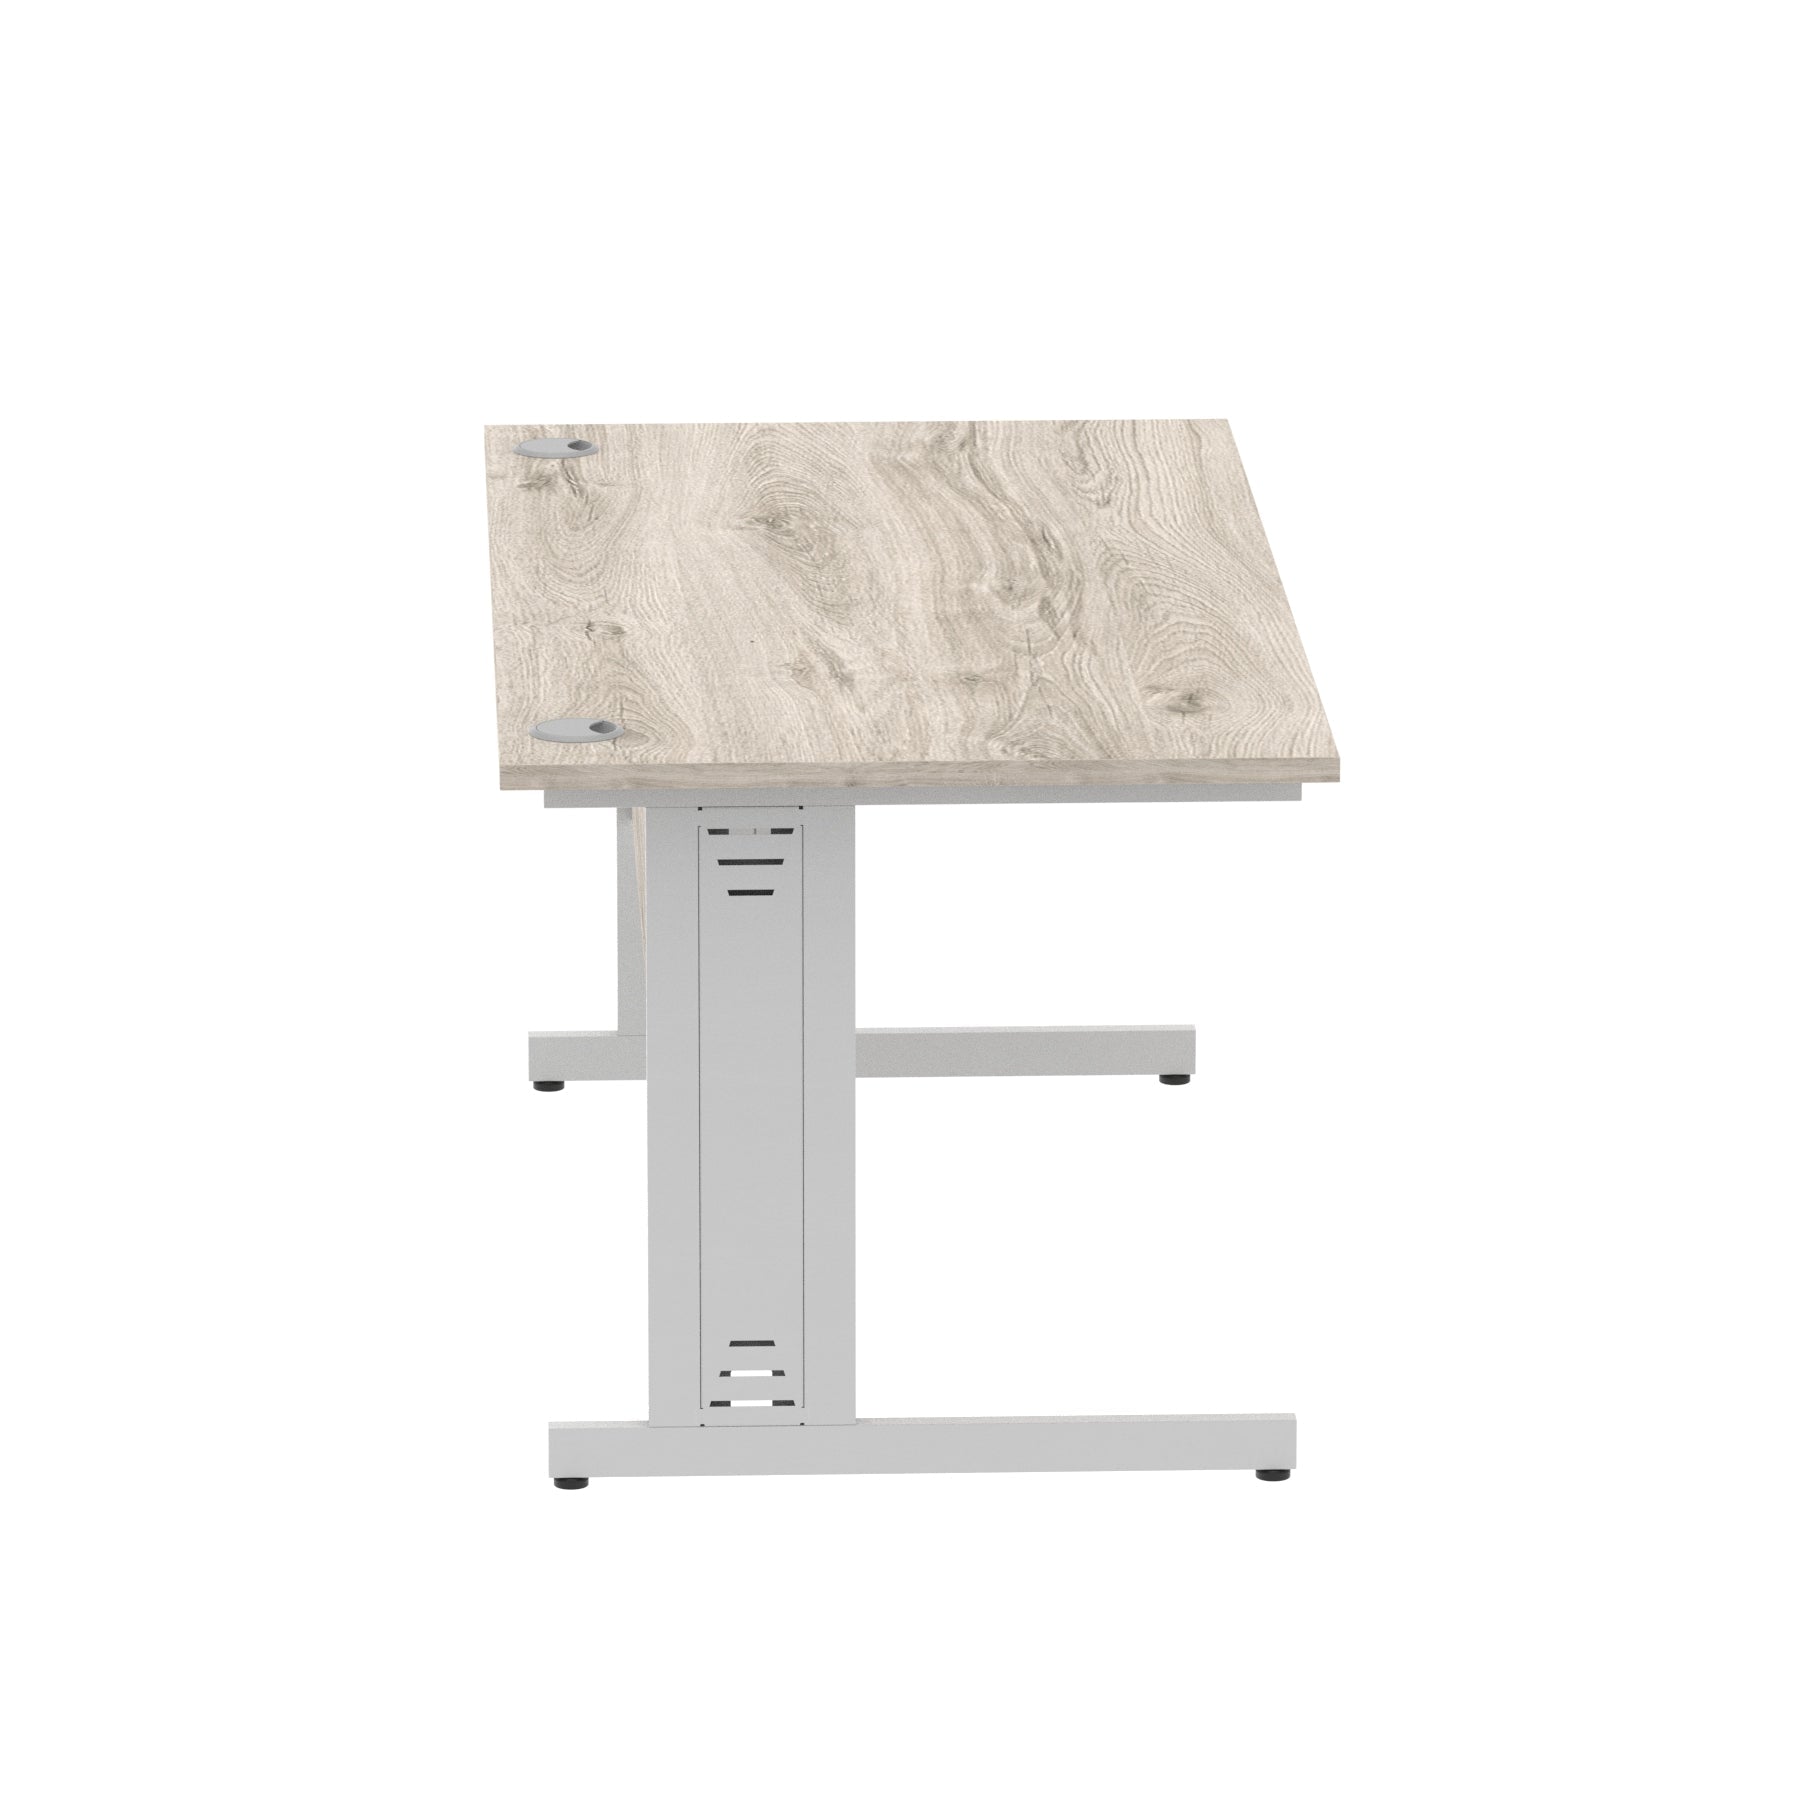 Impulse 1600mm Straight Desk with Cable Managed Leg - MFC Rectangular Table, 1600x800, Silver/White Frame, 5-Year Guarantee